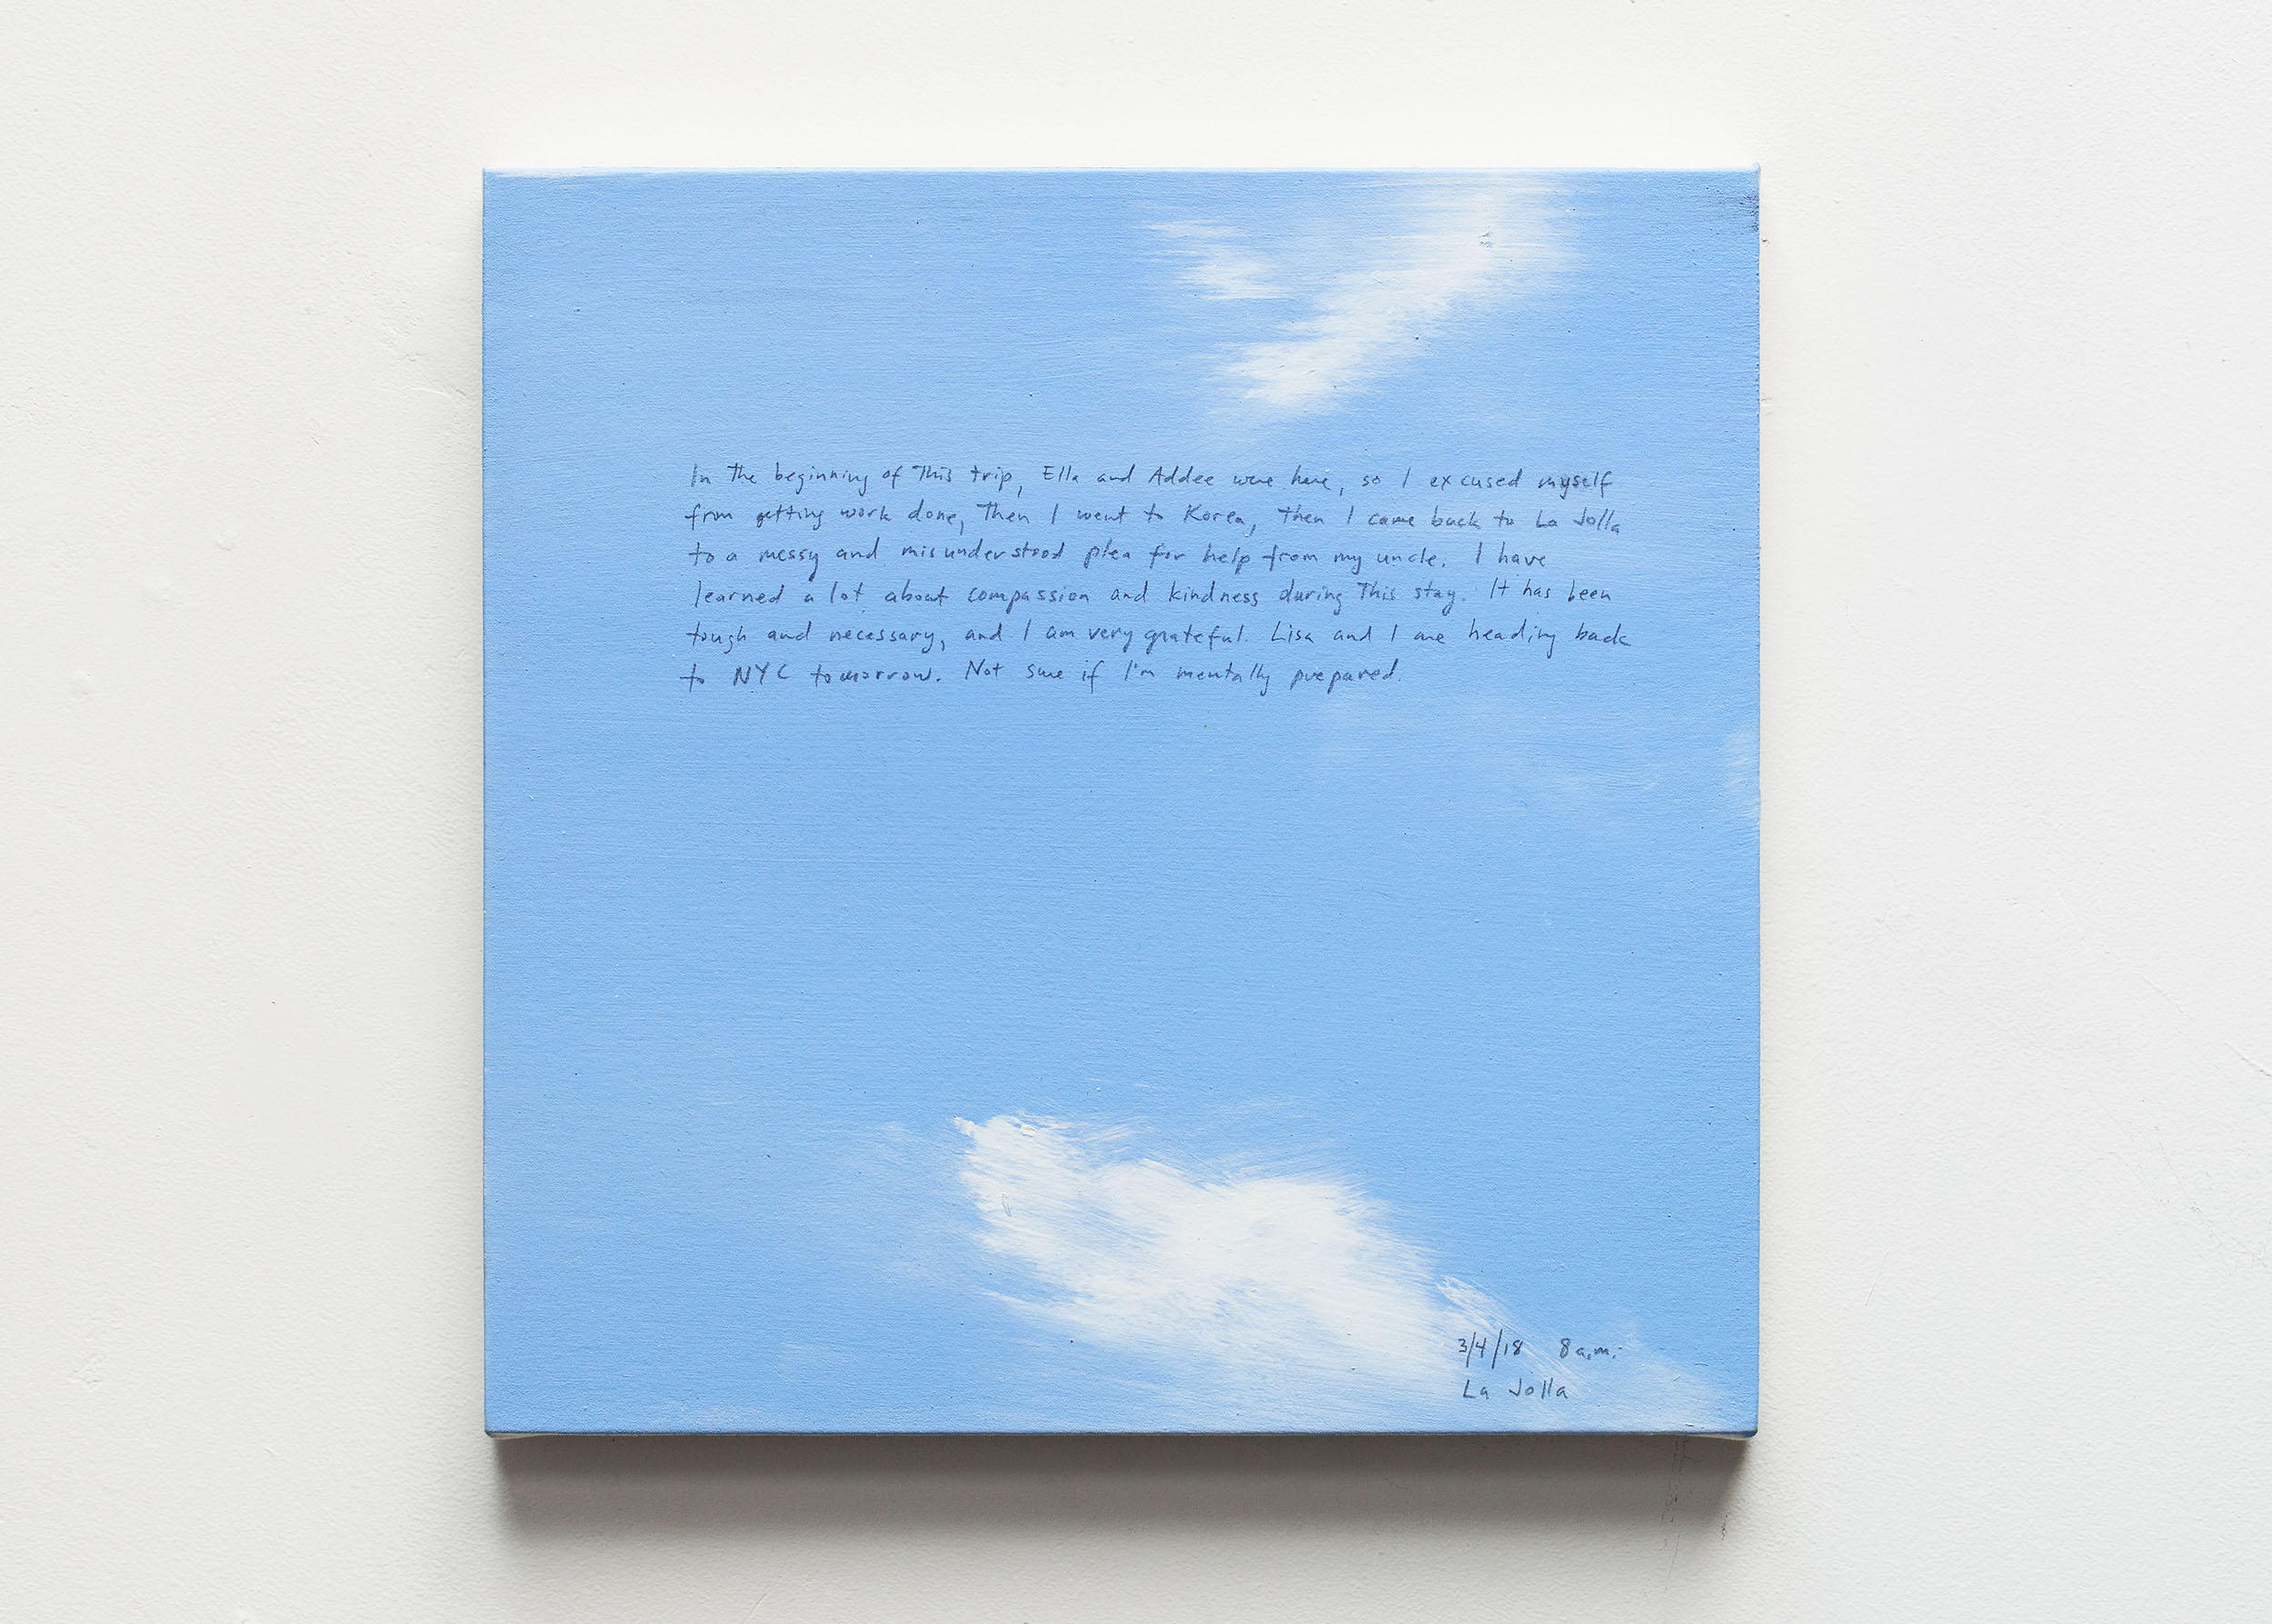 A 14 × 14 inch, acrylic painting of the sky. A journal entry is handwritten on the painting:

“In the beginning of this trip, Ella and Addee were here, so I excused myself from getting work done, then I went to Korea, then I came back to La Jolla to a messy and misunderstood plea for help from my uncle. I have learned a lot about compassion and kindness during this stay. I thaw been tough and necessary, and I am very grateful. Lisa and I are heading back to NYC tomorrow. Not sure if I’m mentally prepared.

3/4/18 8 a.m.
La Jolla”